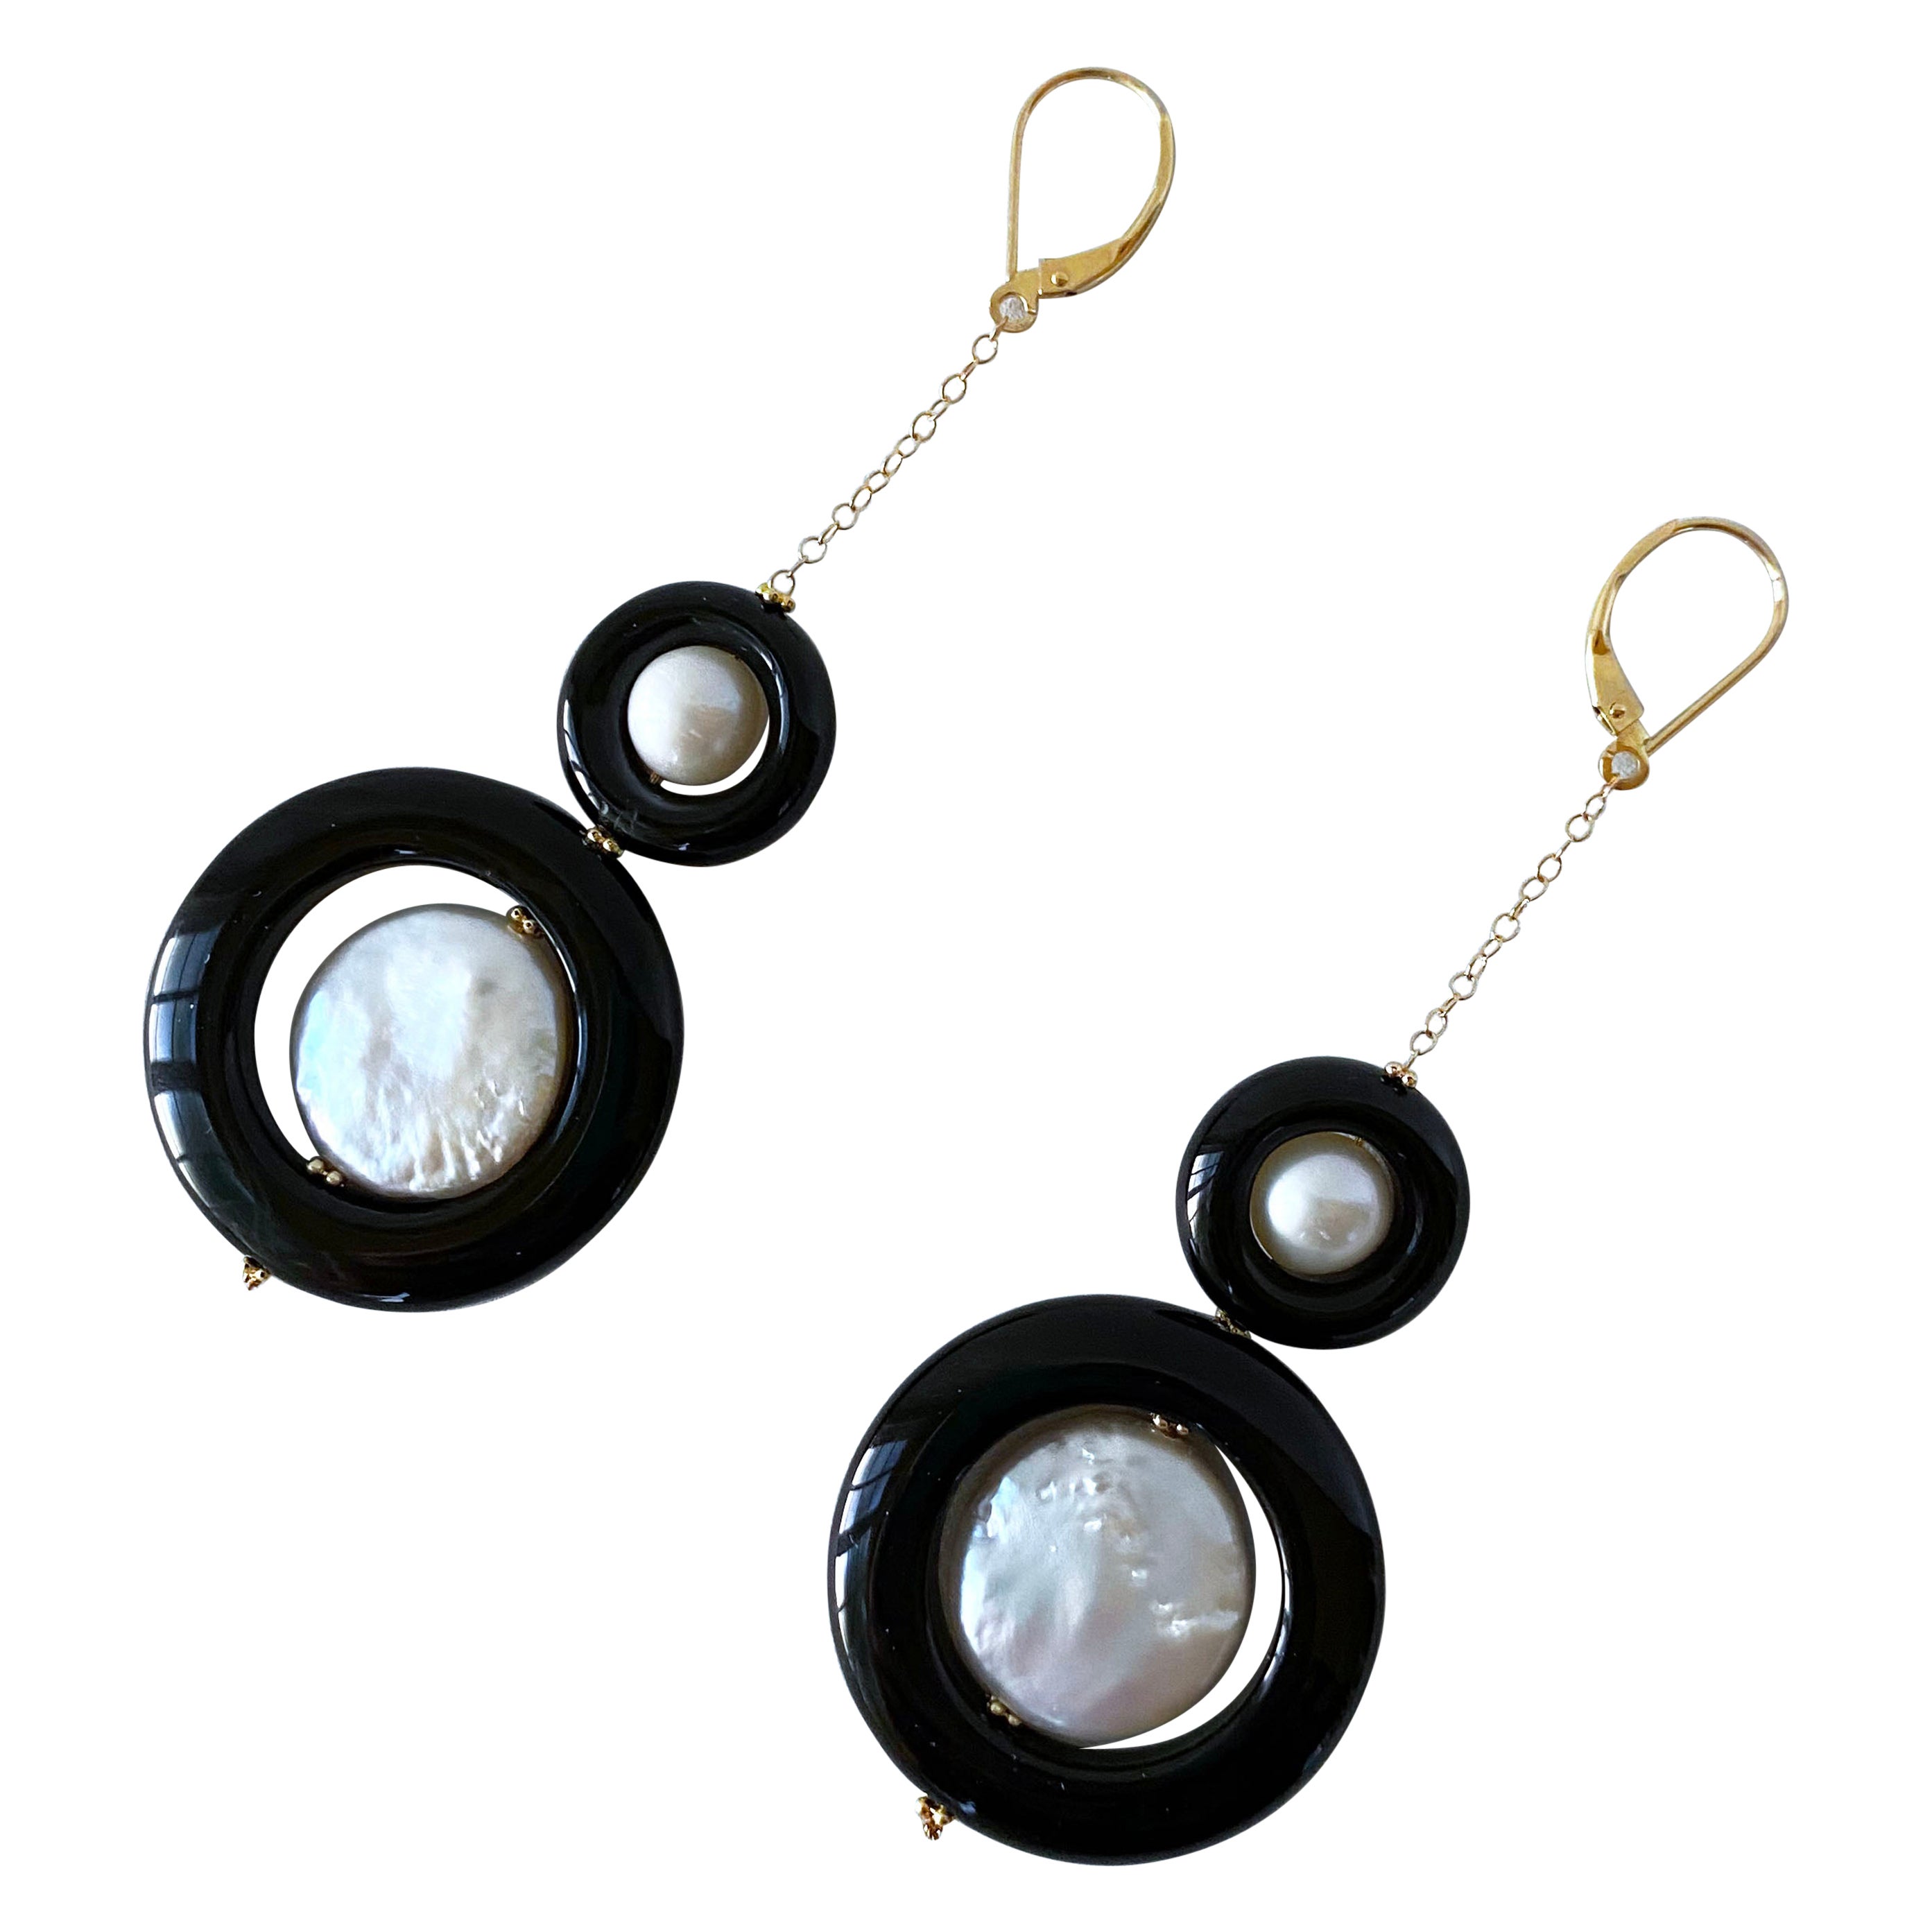 Marina J. Two Tier Pearl, Black Onyx and Solid 14k Yellow Gold Earrings